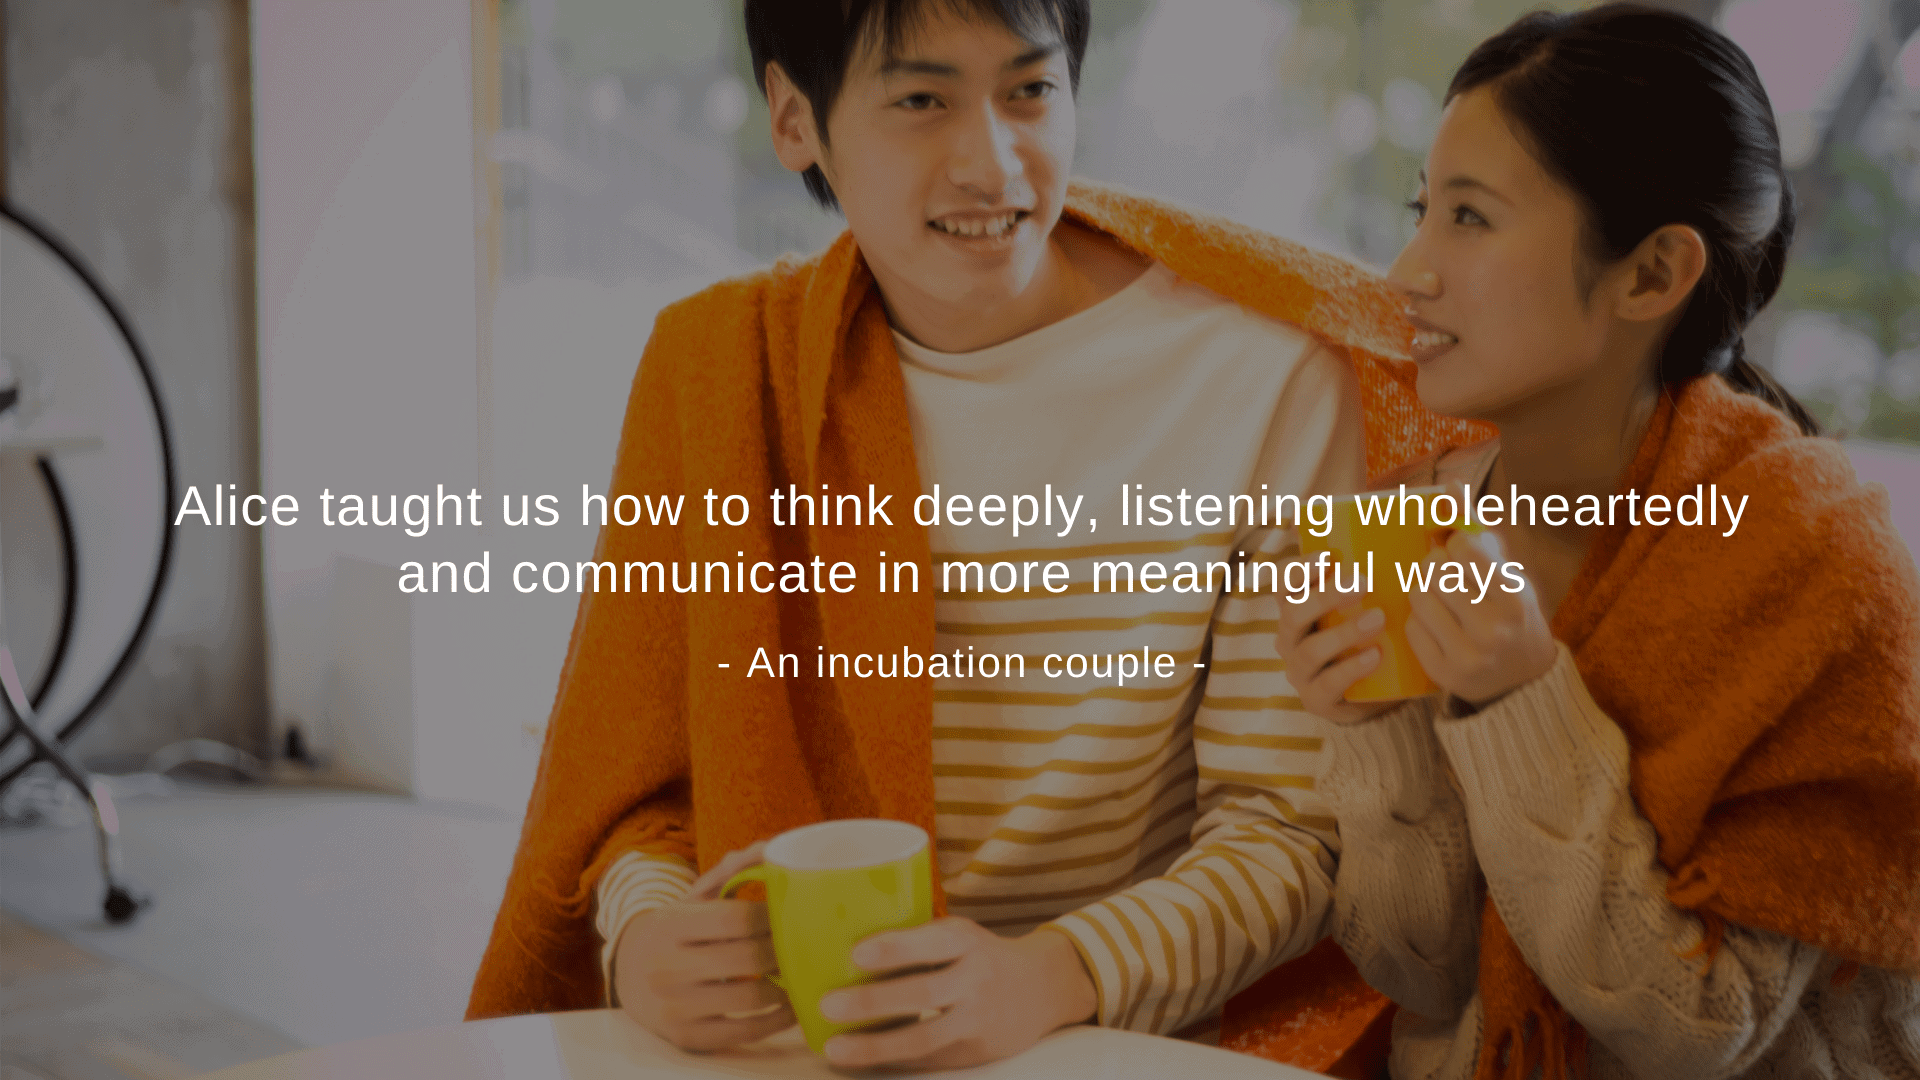 “Alice taught us how to think deeply, listening wholeheartedly and communicate in more meaningful ways.” An incubation couple